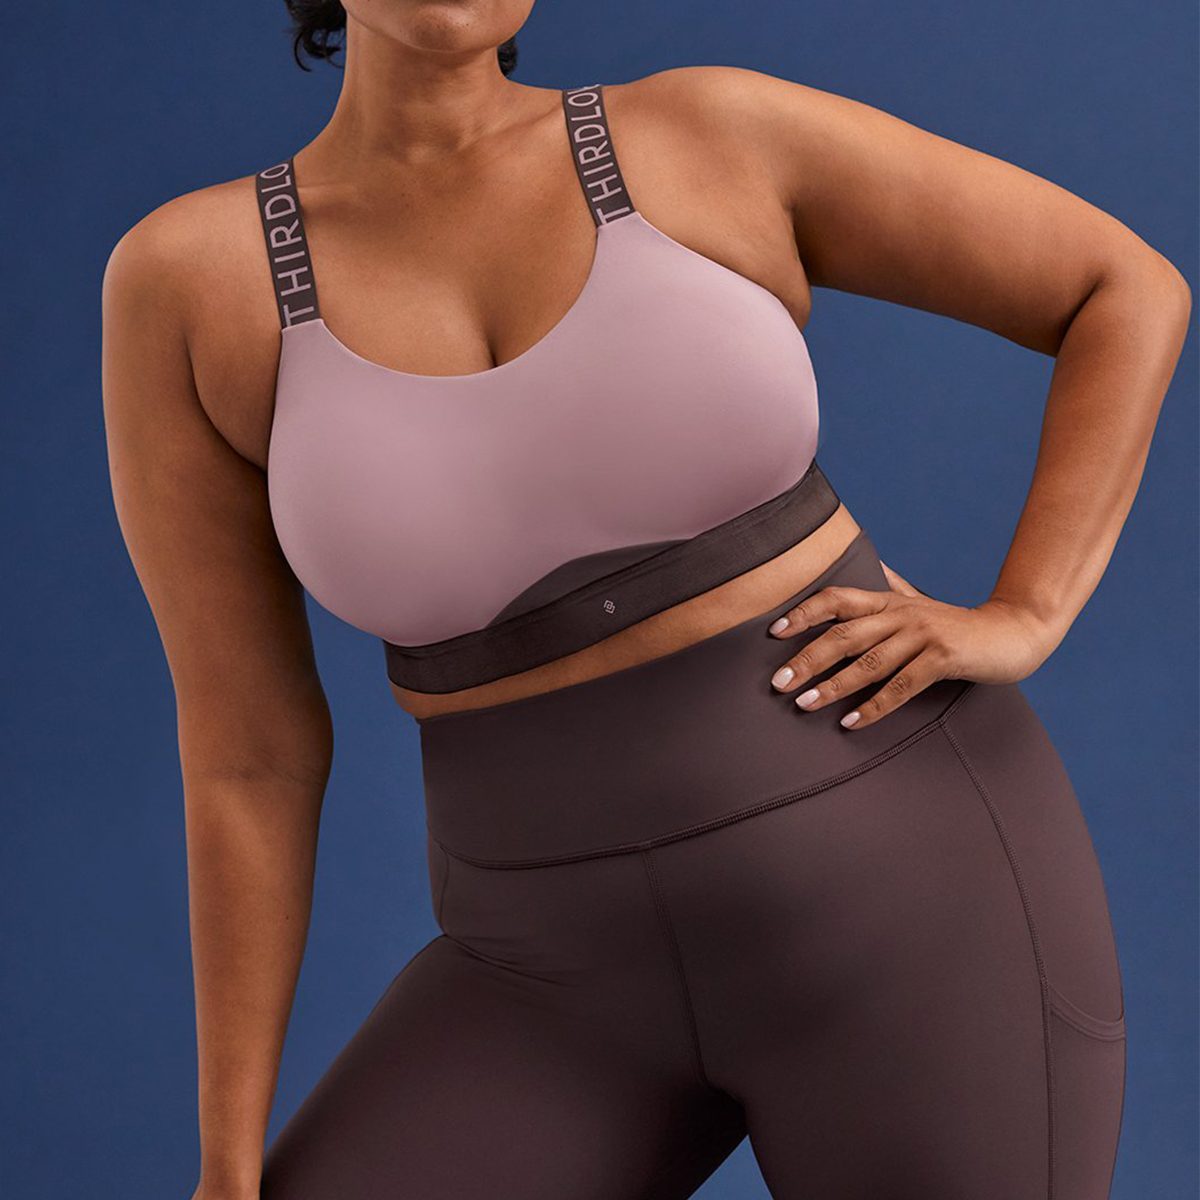 The ThirdLove Sports Bra Is Finally Here—Plus Leggings and More